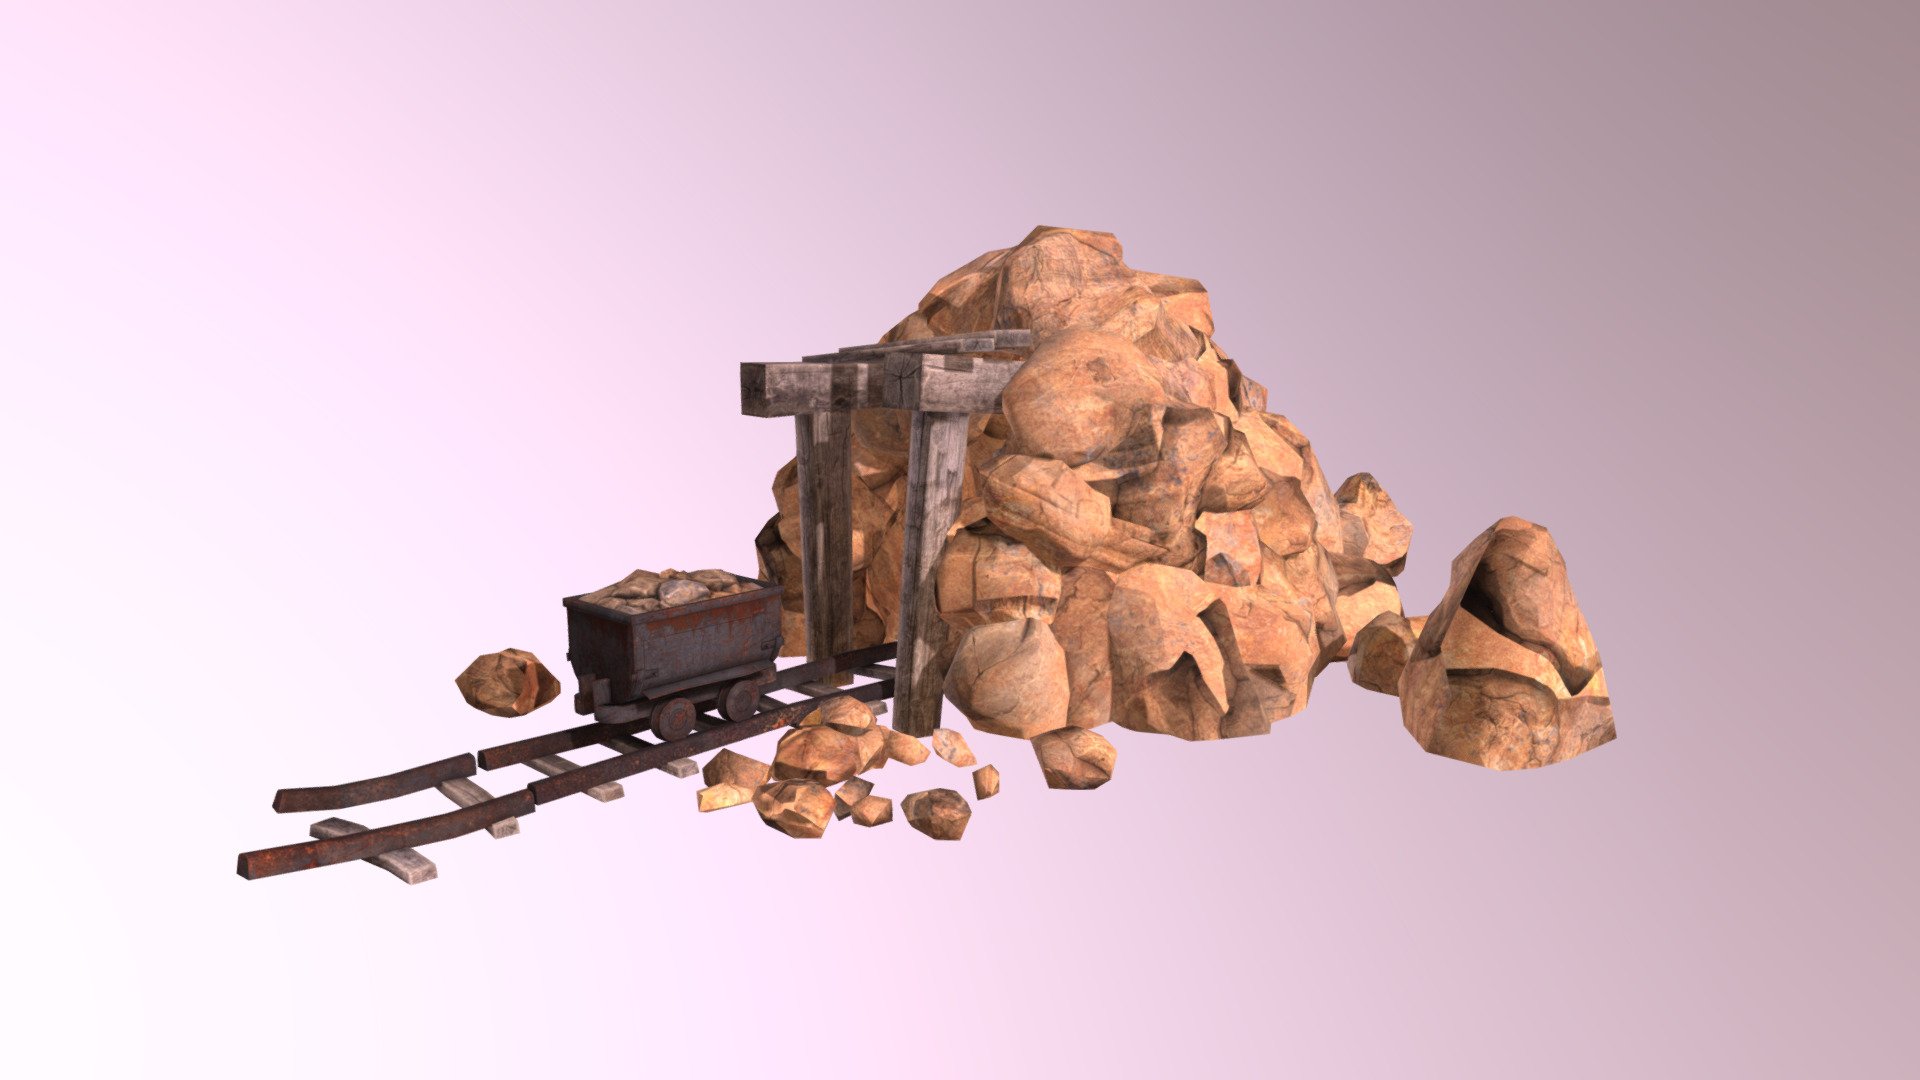 3D Gold Mine.

The pack has highly detailed Gold Mine ready for use in your project. Just drag and drop prefabs into your scene and achieve beautiful results in no time. 
Available formats FBX, 3DS Max 2017

We are here to empower the creators. Please contact us via the https://aaanimators.com/#contact-area if you are having issues with our assets. Our team will get back to you momentarily.

Mesh complexities:


Gold_Mine_Cart 1877 verts; 2076 tris uv 


Gold_Mine_Stone_01 a 1476 verts; 2454 tris uv 


Gold_Mine_Stone_01 b  455 verts; 816 tris uv 


Gold_Mine_Stone_01 c 188 verts; 314 tris uv 


Gold_Mine_Stone_01 d 56 verts; 82 tris uv 


Gold_Mine_Stone_01 e 48 verts; 70 tris uv 


Gold_Mine_Stone_01 f 90 verts; 140 tris uv 


Gold_Mine_Stone_02 a 1334 verts; 2154 tris uv 


Gold_Mine_Stone_02 b 705 verts; 1176 tris uv 


Includes 3 sets of textures with 3 materials:

● Diffuse

● Normal

● Specular - Gold Mine - Buy Royalty Free 3D model by aaanimators 3d model